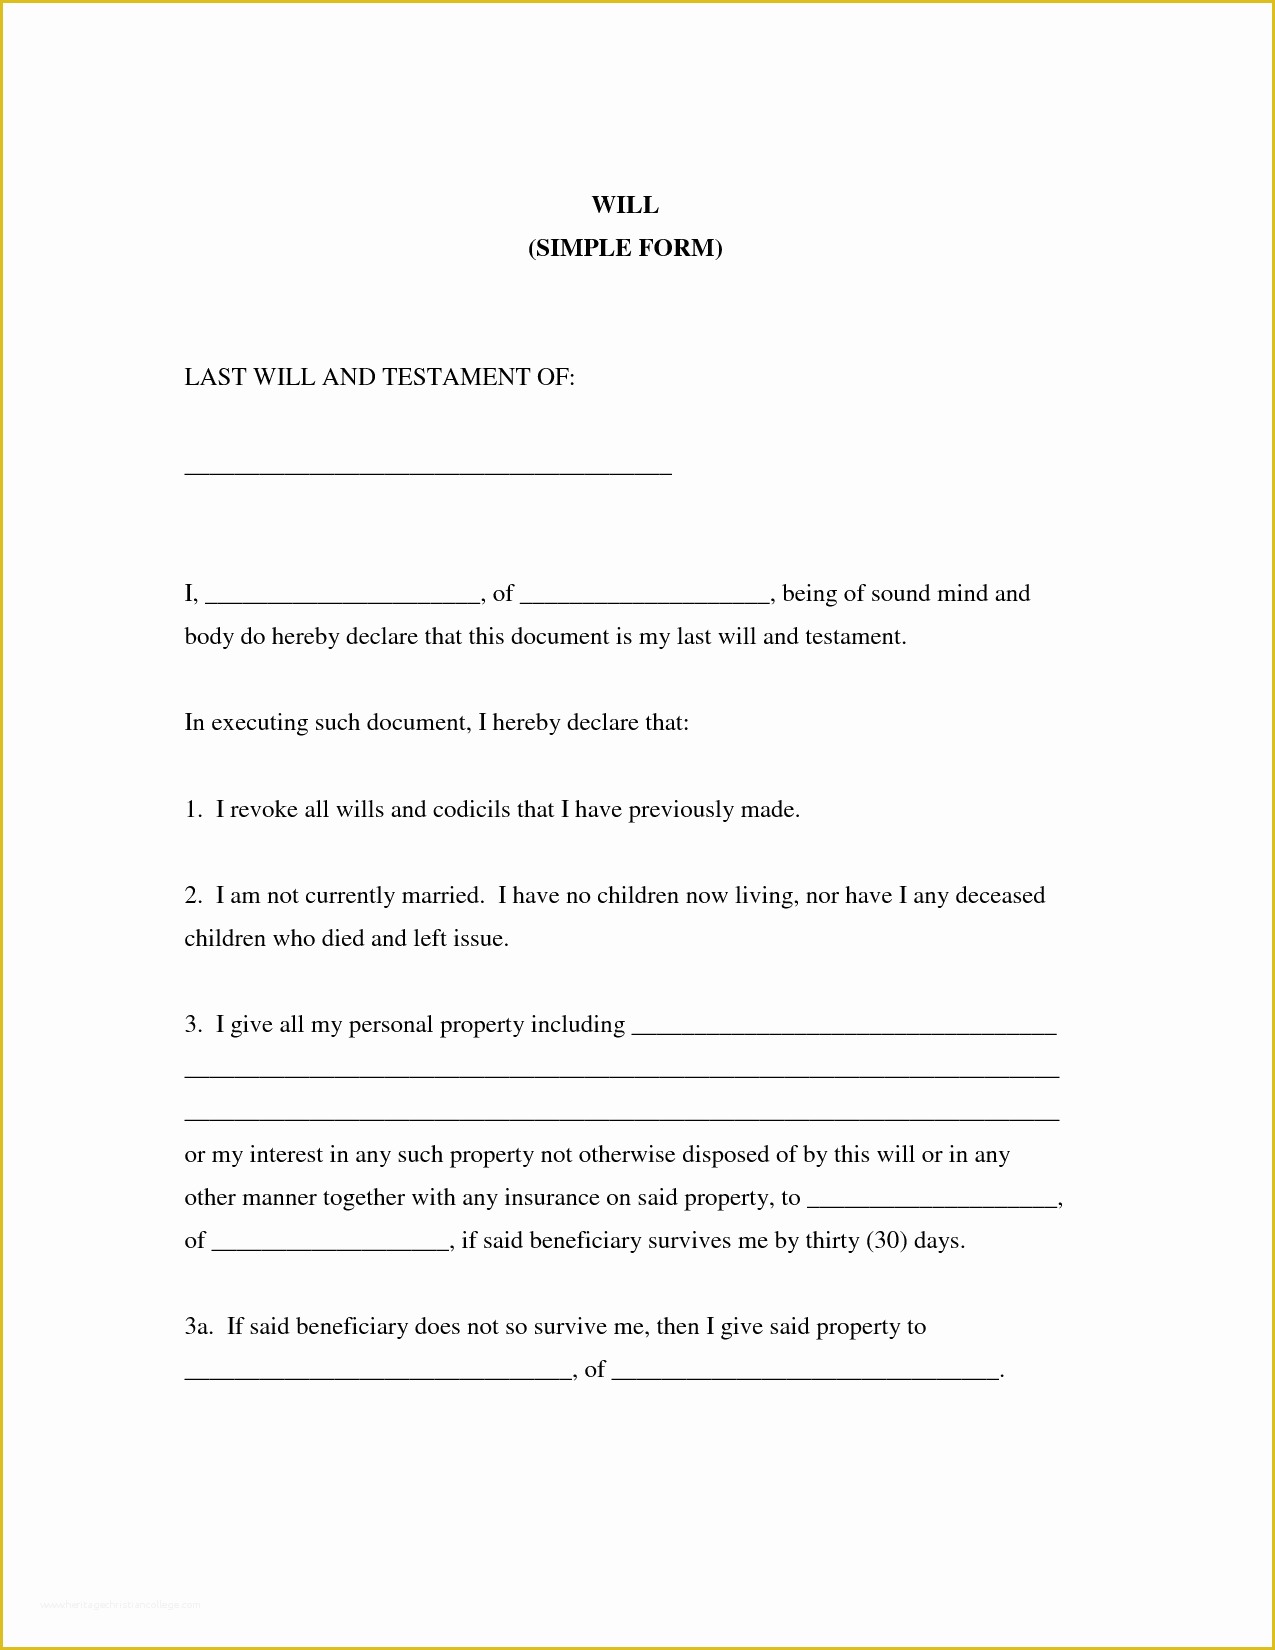 Last Will and Testament Free Template Tennessee Of Best S Of Simple Will forms Free Free Printable